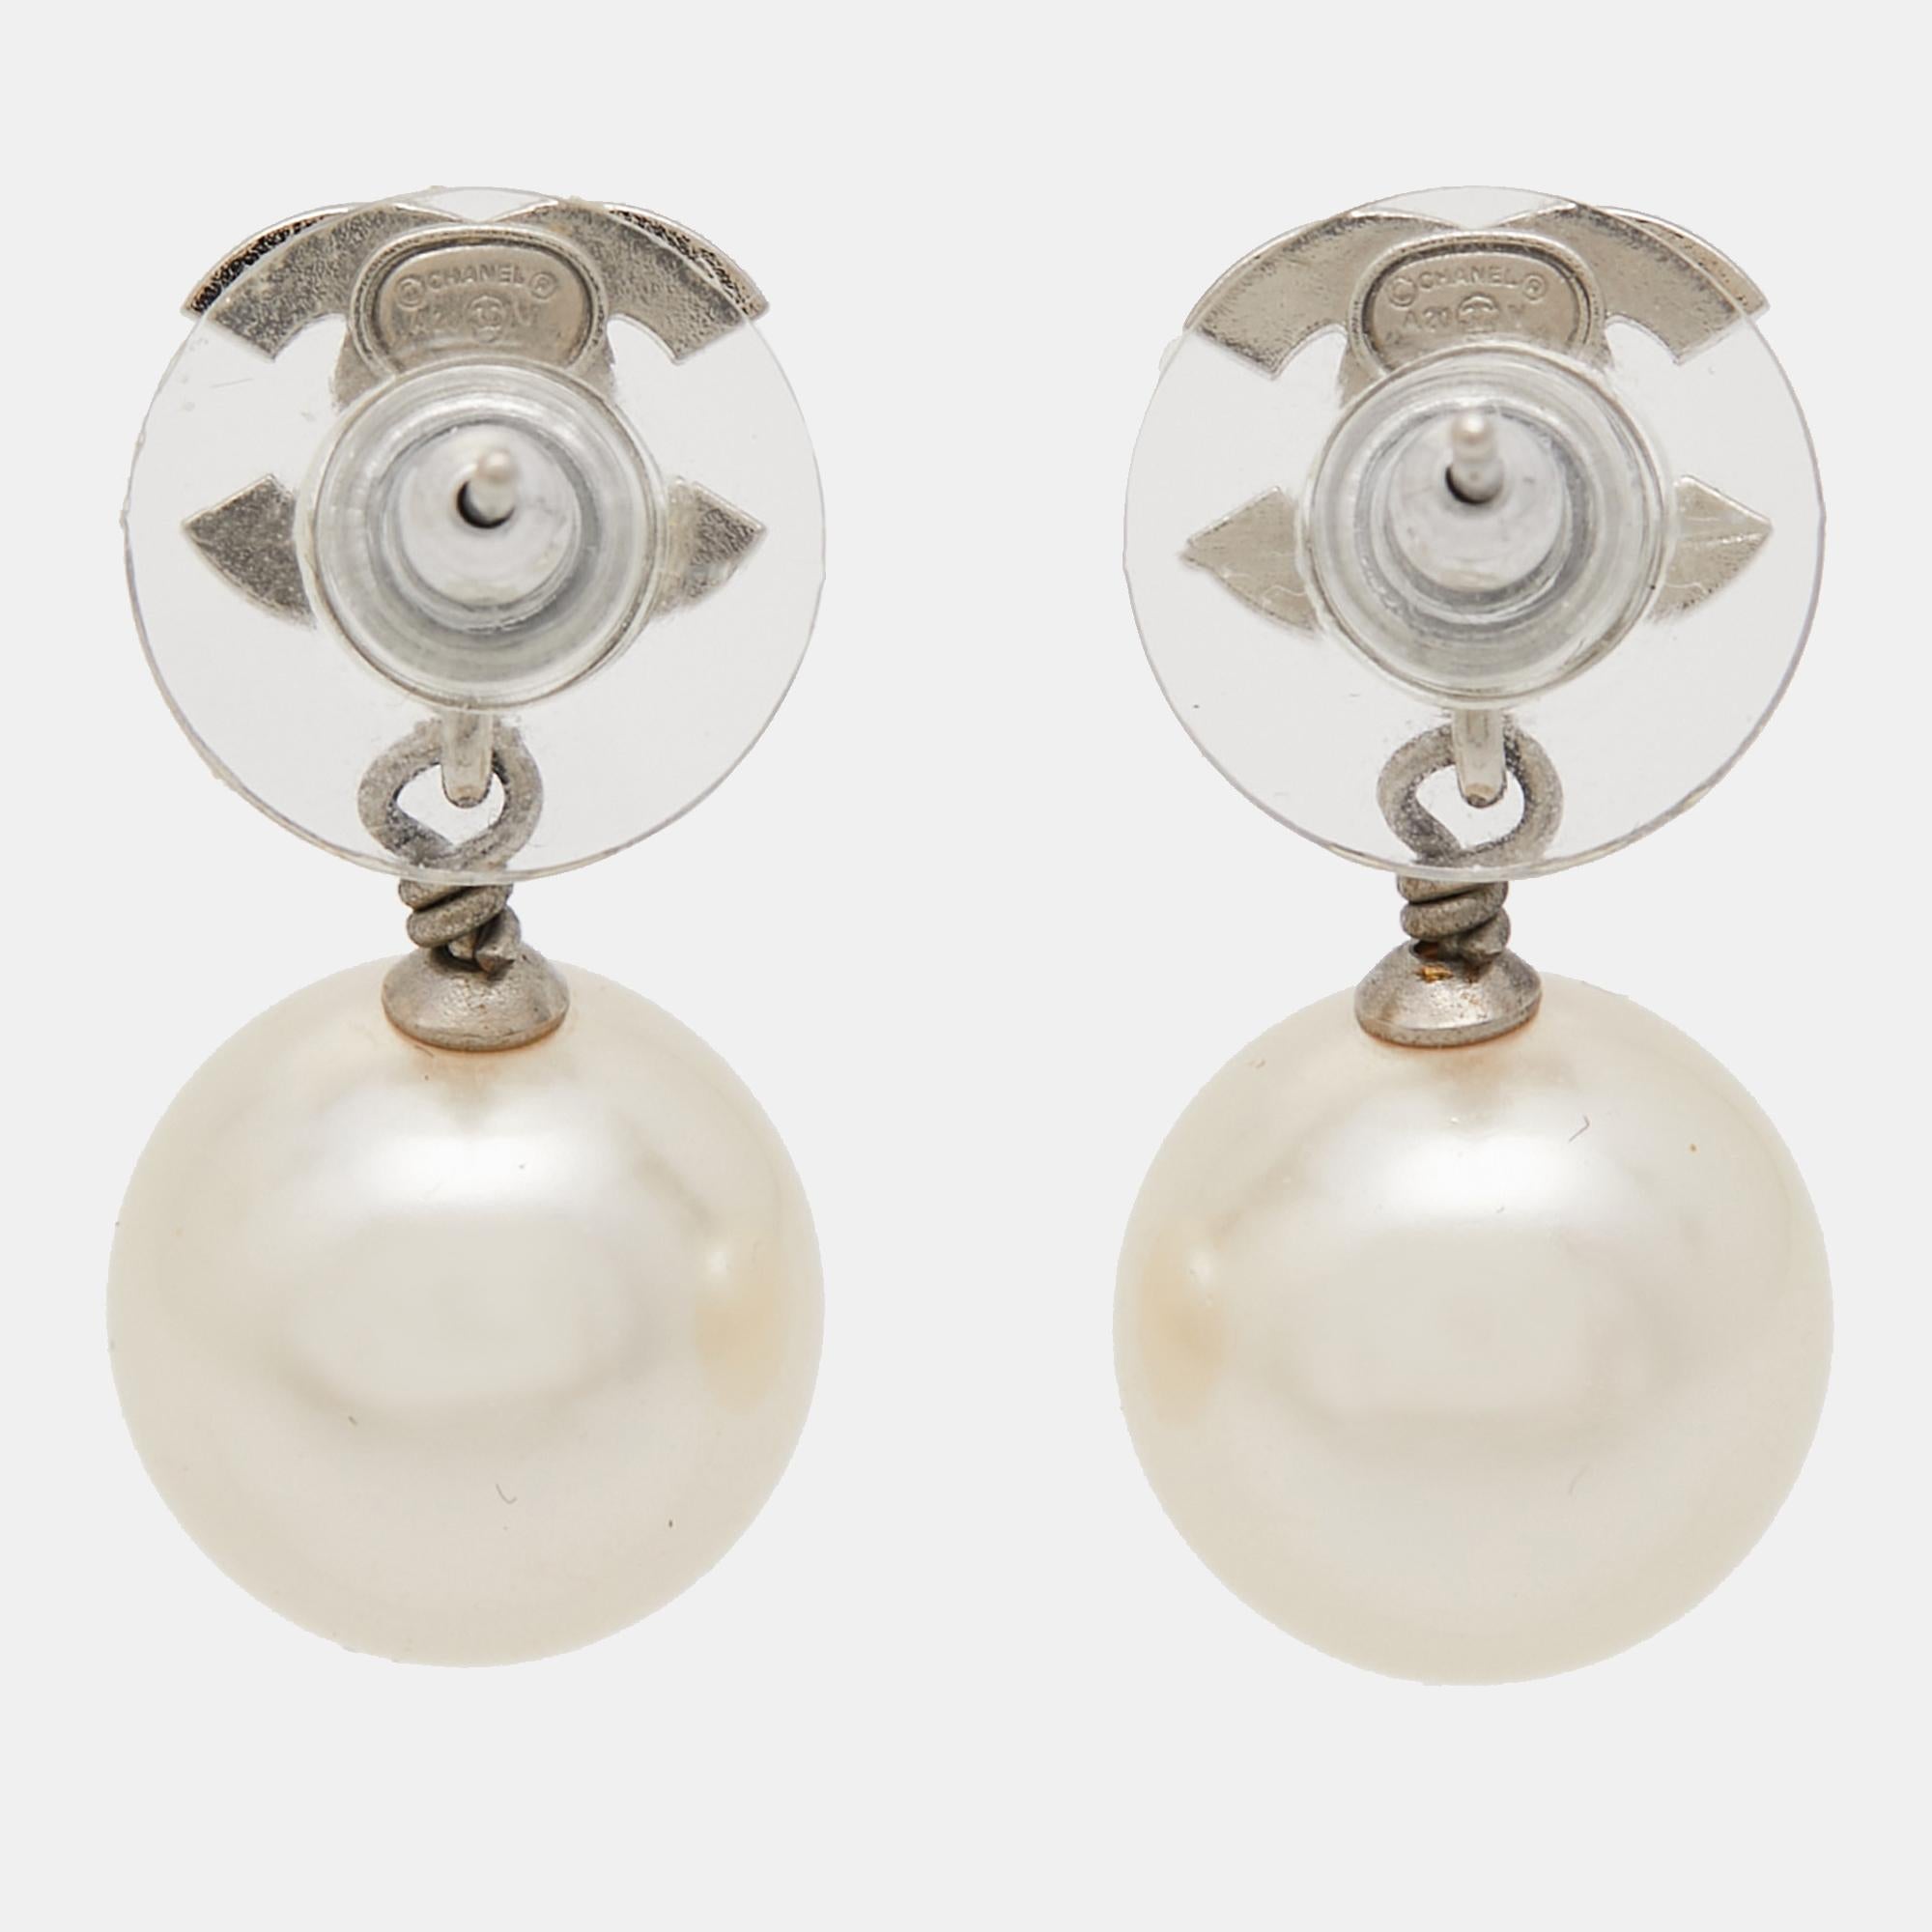 A feminine flair and a chic appeal characterize these stunning Chanel earrings. Sculpted from high-grade materials, they will look beautiful when you style them with your outfits and other accessories.

Includes: Original Box

